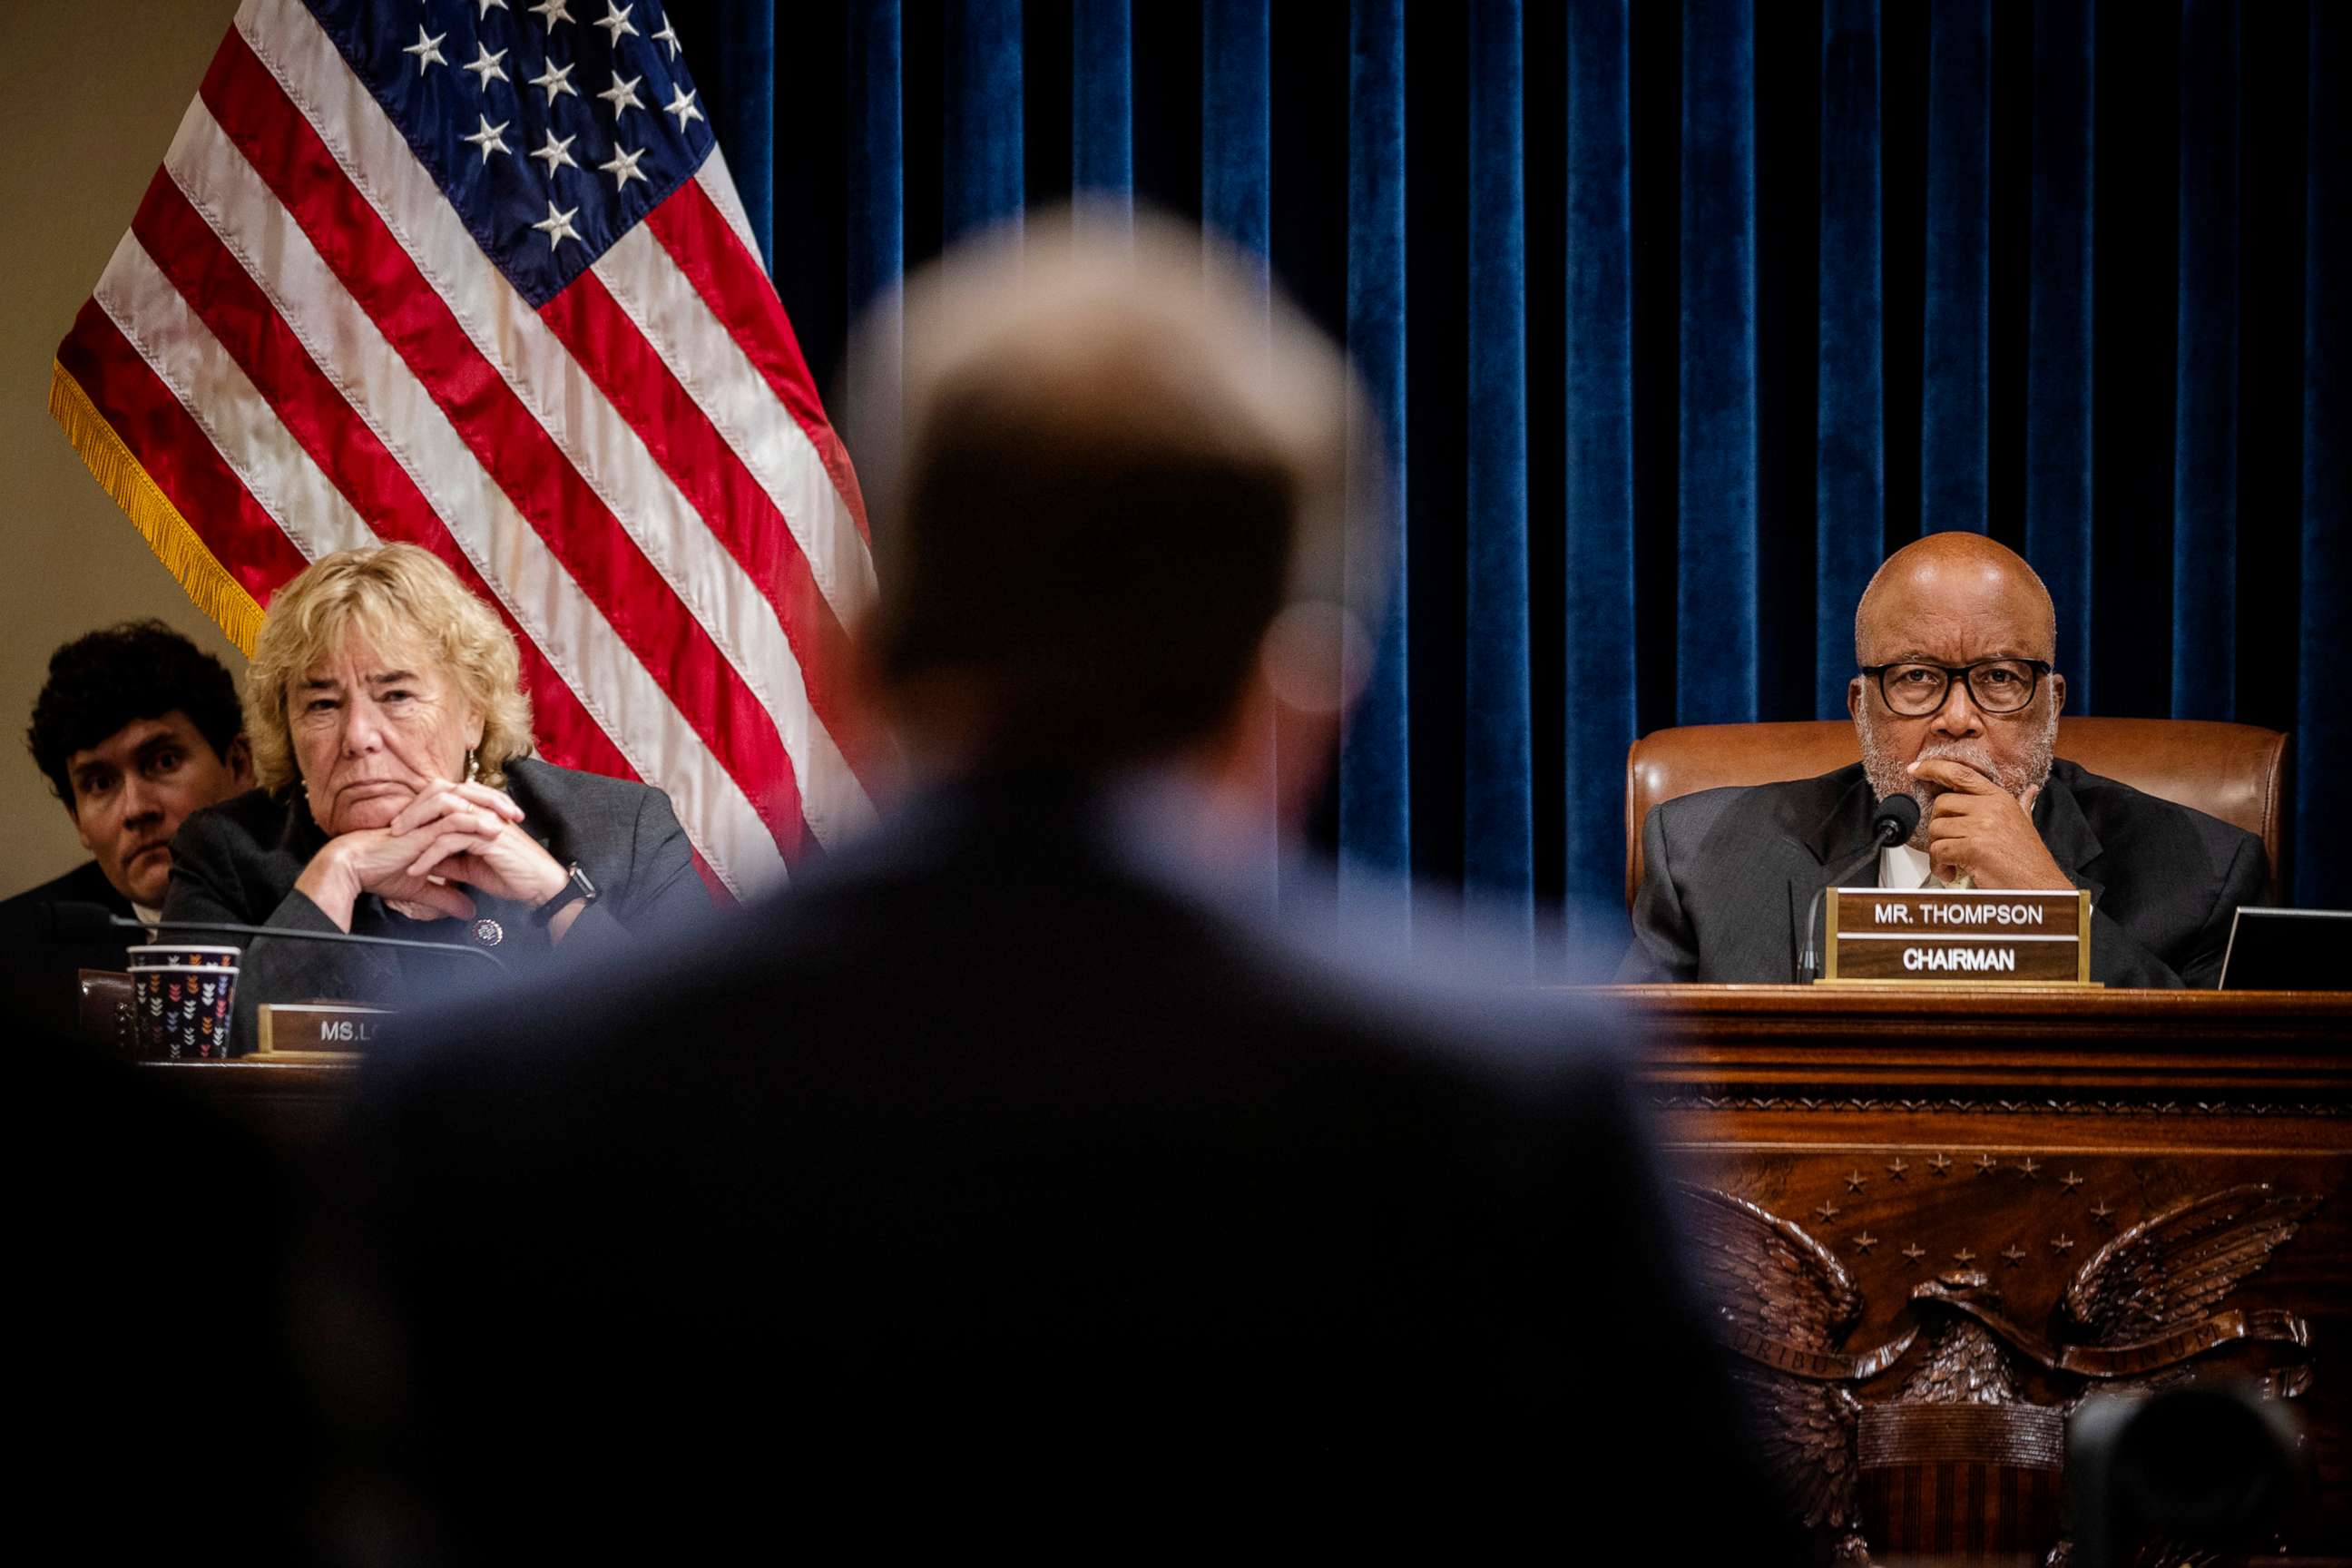 PHOTO: Chair Rep. Bennie Thompson, right, and Rep. Zoe Lofgren, left, listen to D.C. Metropolitan Police Officer Daniel Hodges testify before the House Select Committee investigating the Jan. 6 attack on U.S. Capitol, July 27, 2021, in Washington, D.C.